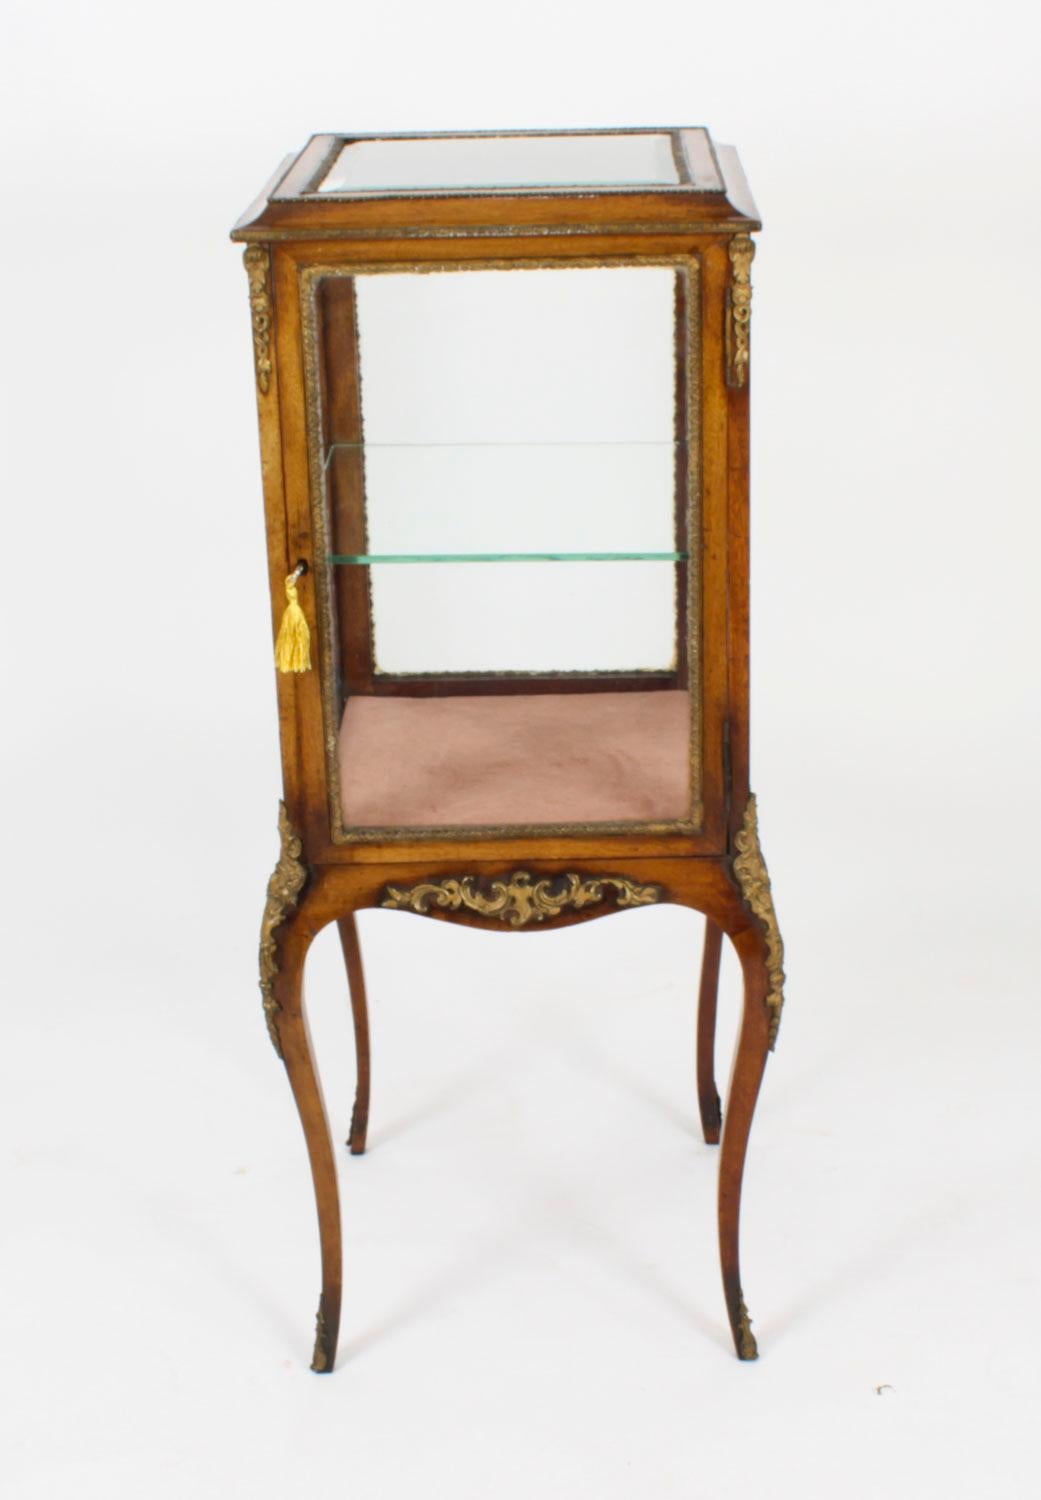 Antique Square Ormolu Mounted Vitrine Display Cabinet 19th Century For Sale 8